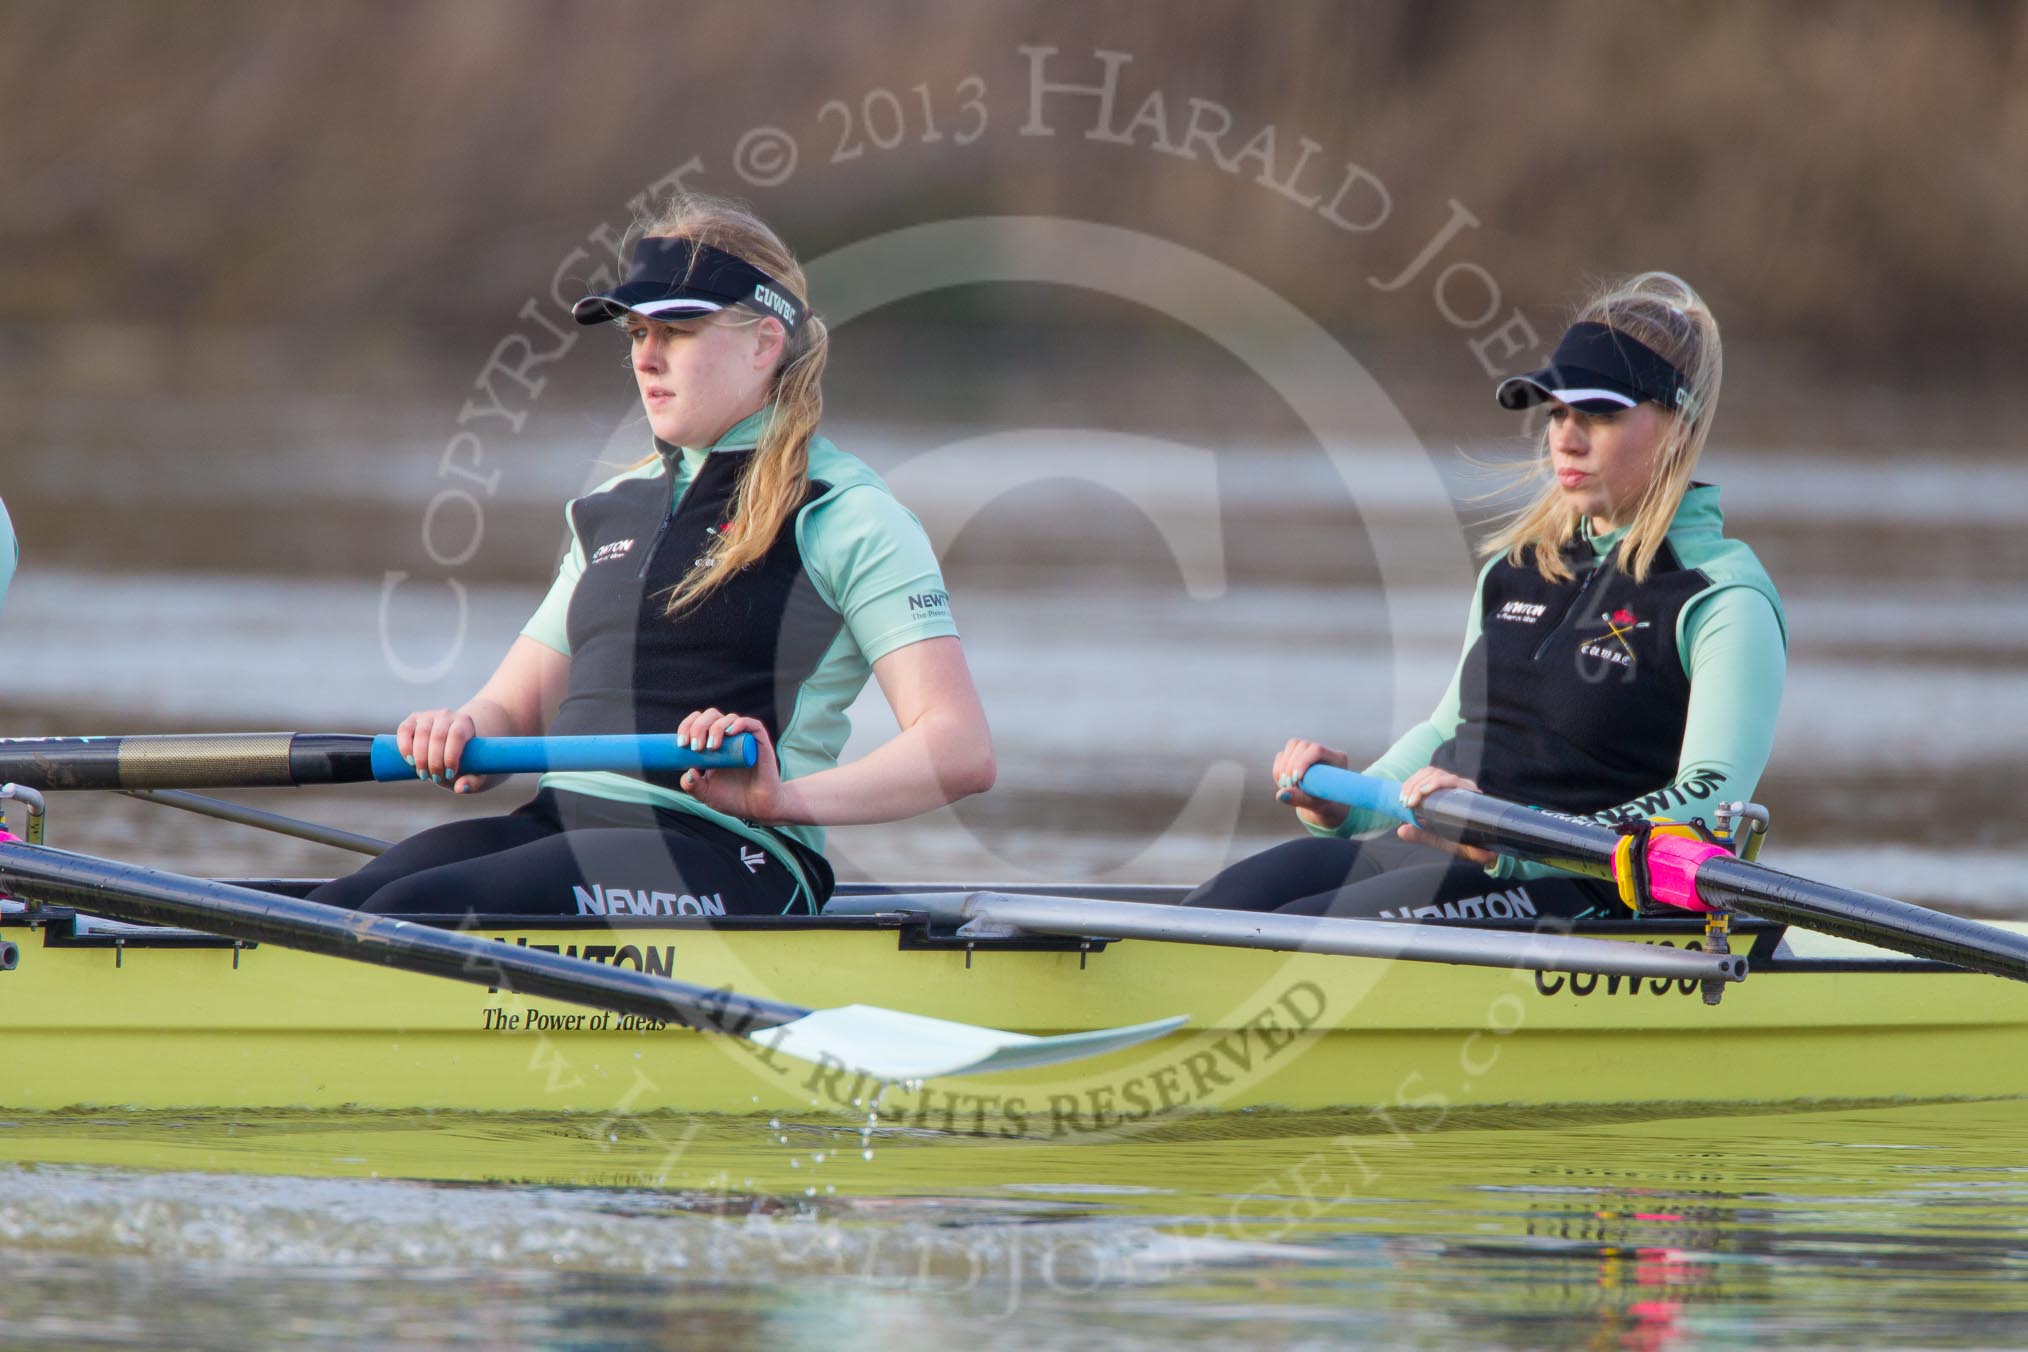 The Boat Race season 2013 - CUWBC training: In the CUWBC reserve boat Blondie in the 2 seat Ania Slotala and bow Clare Hall..
River Thames near Remenham,
Henley-on-Thames,
Oxfordshire,
United Kingdom,
on 19 March 2013 at 16:07, image #114